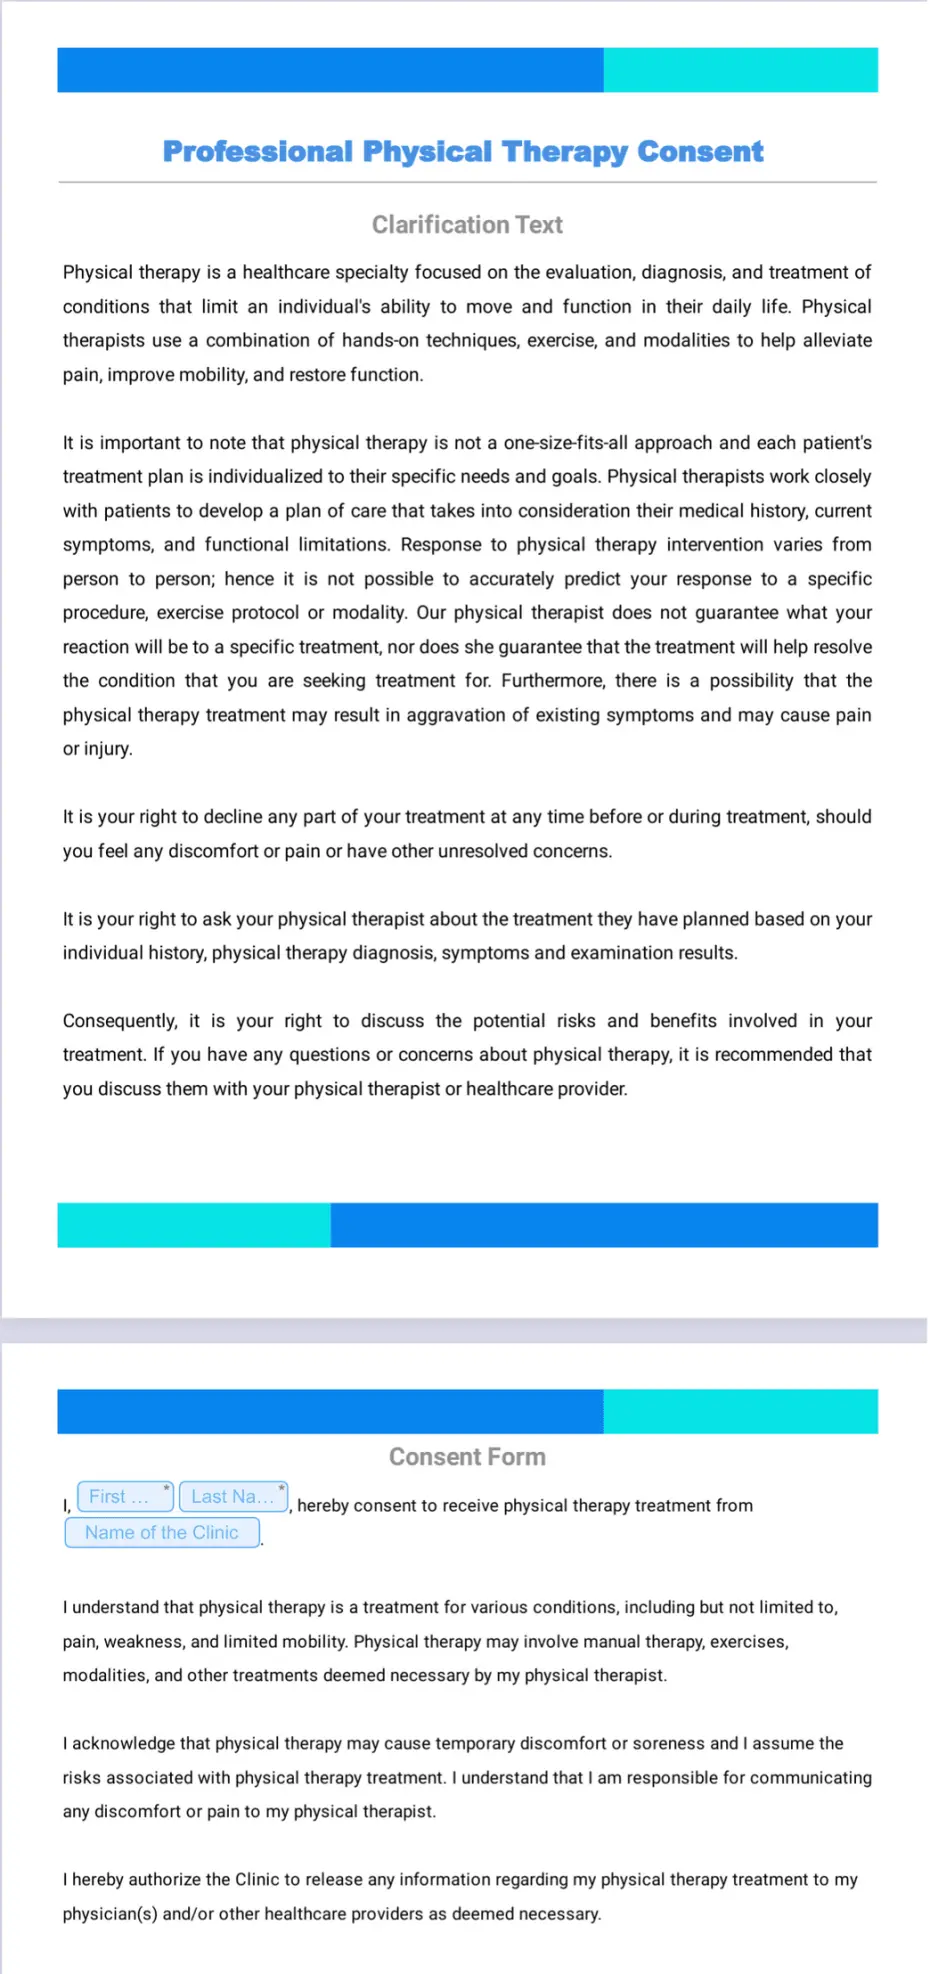 Professional Physical Therapy Consent Template